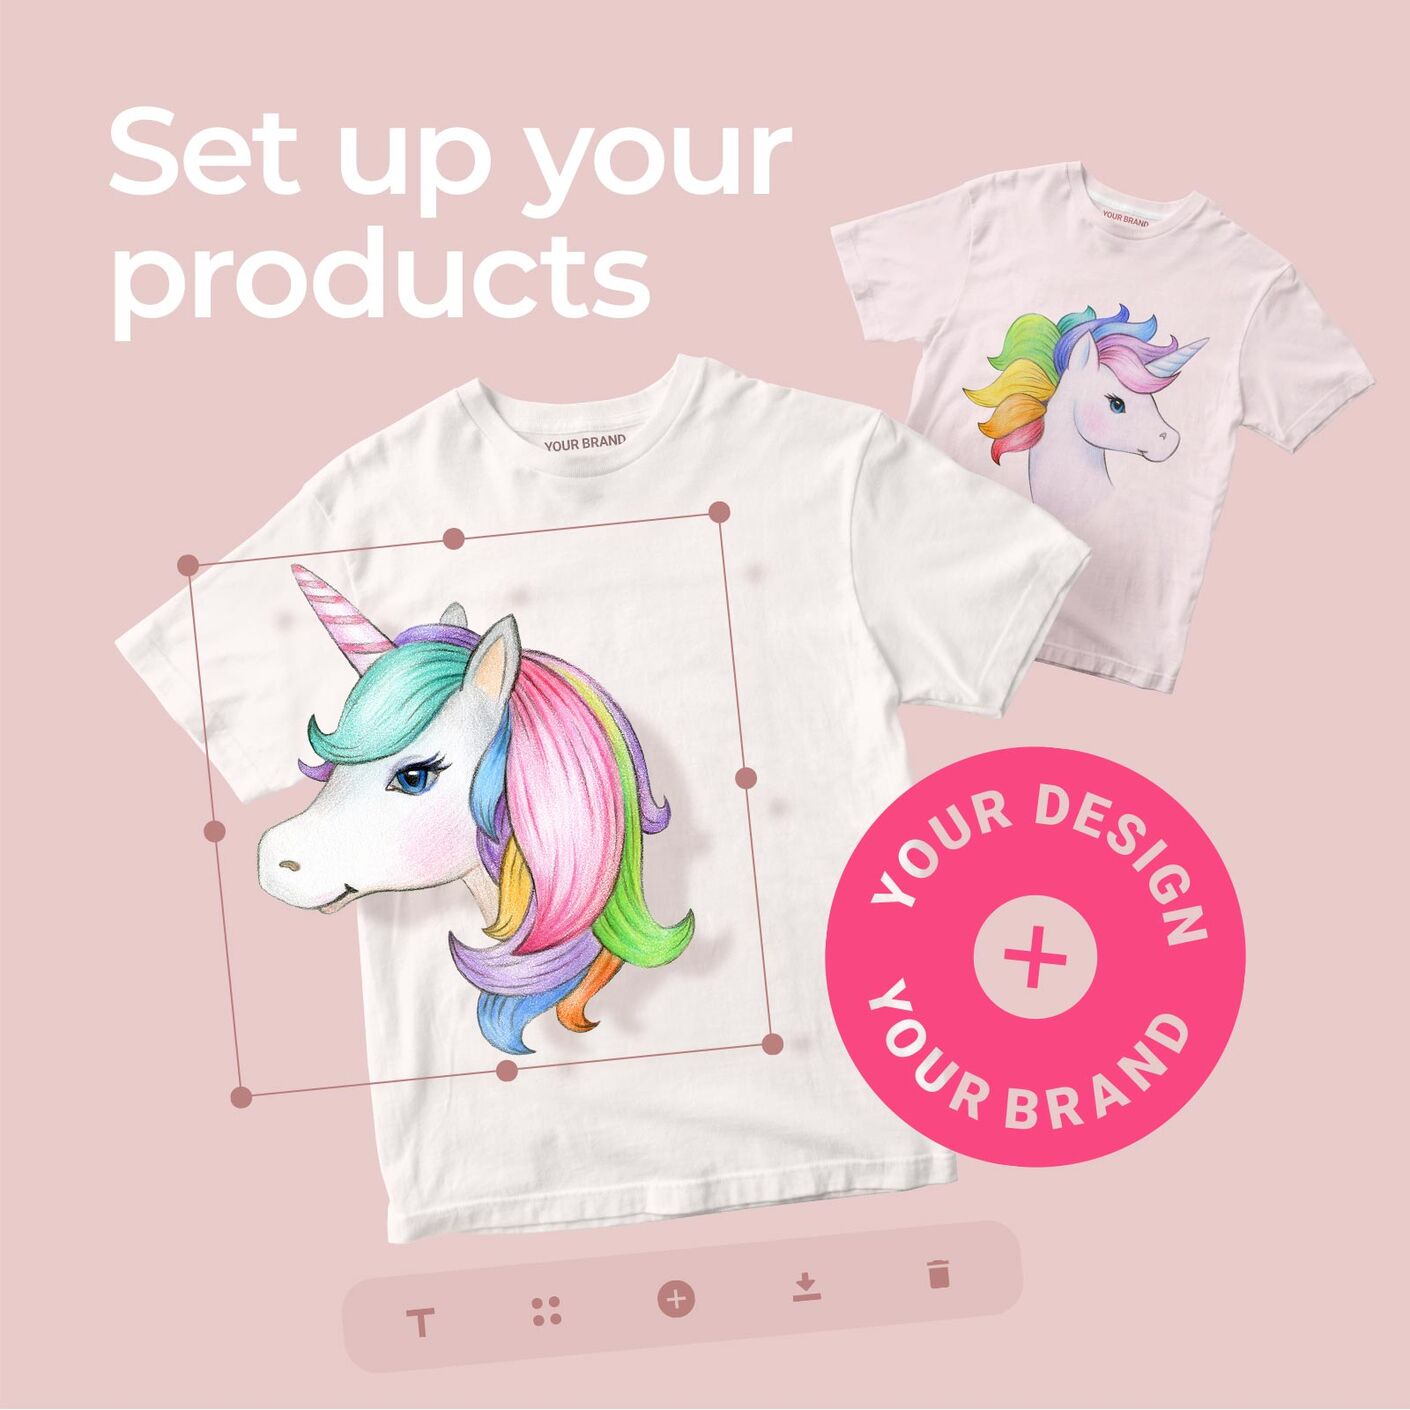 Set up your products